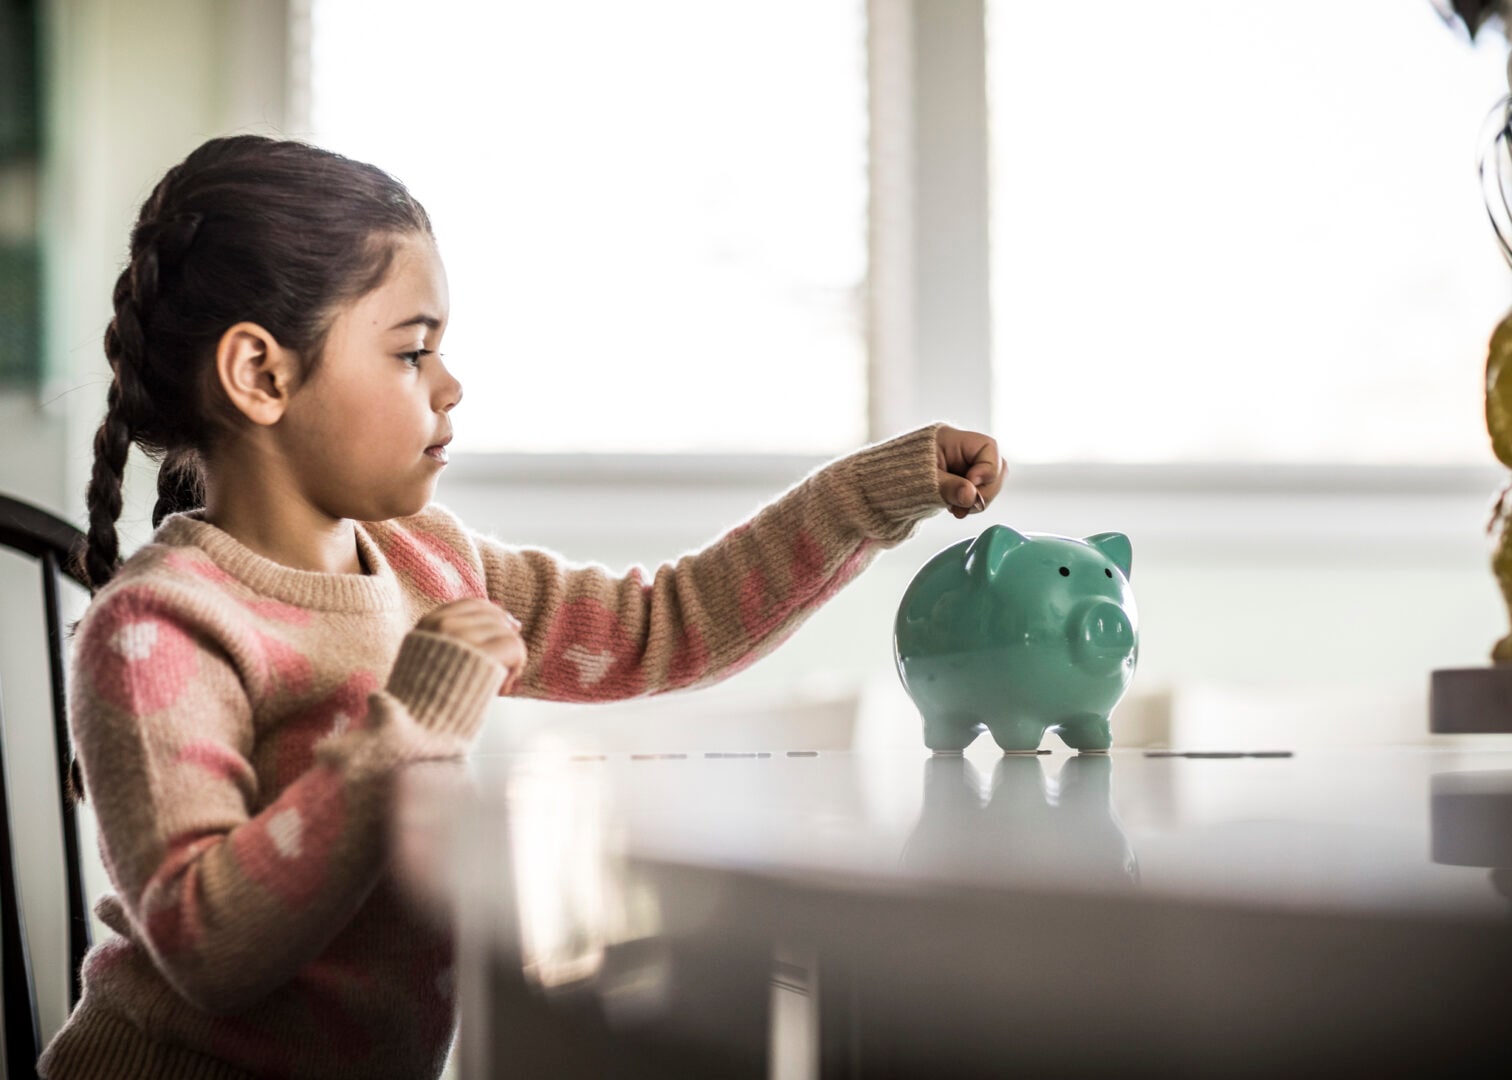 5 reasons to give your child an allowance